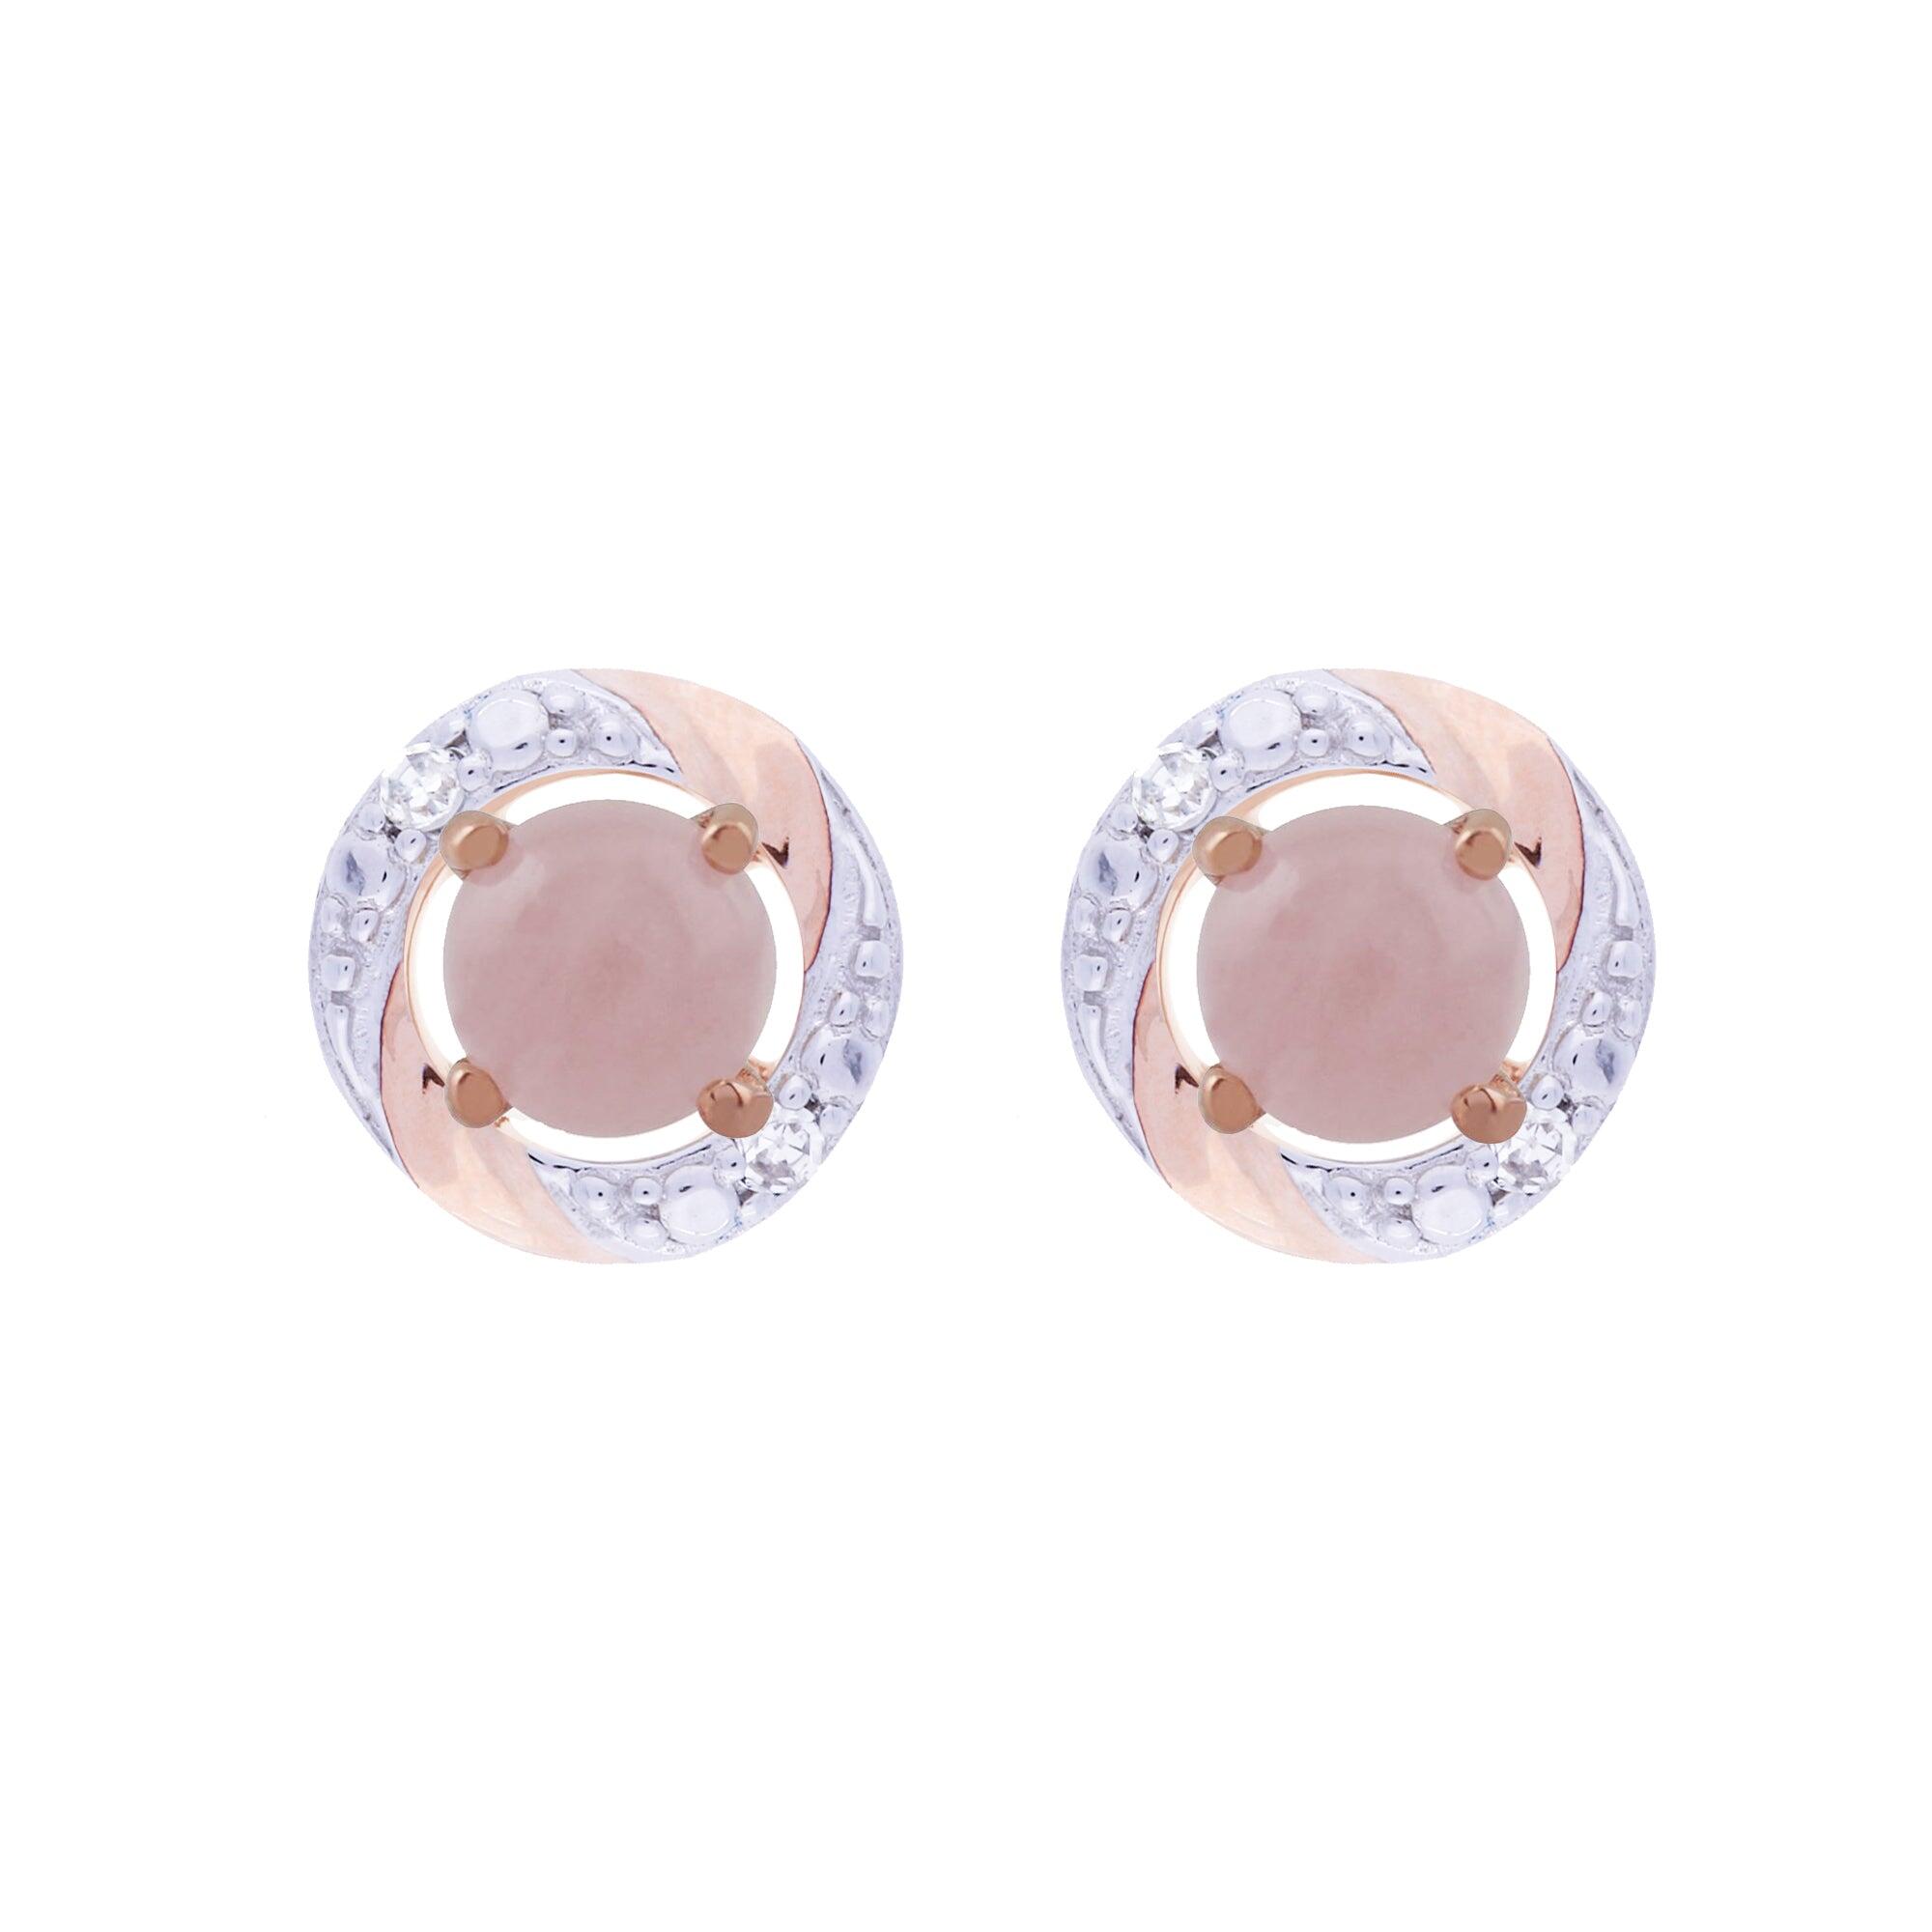 Classic Round Rose Quartz Stud Earrings with Detachable Diamond Round Earrings Jacket Set in 9ct Rose Gold